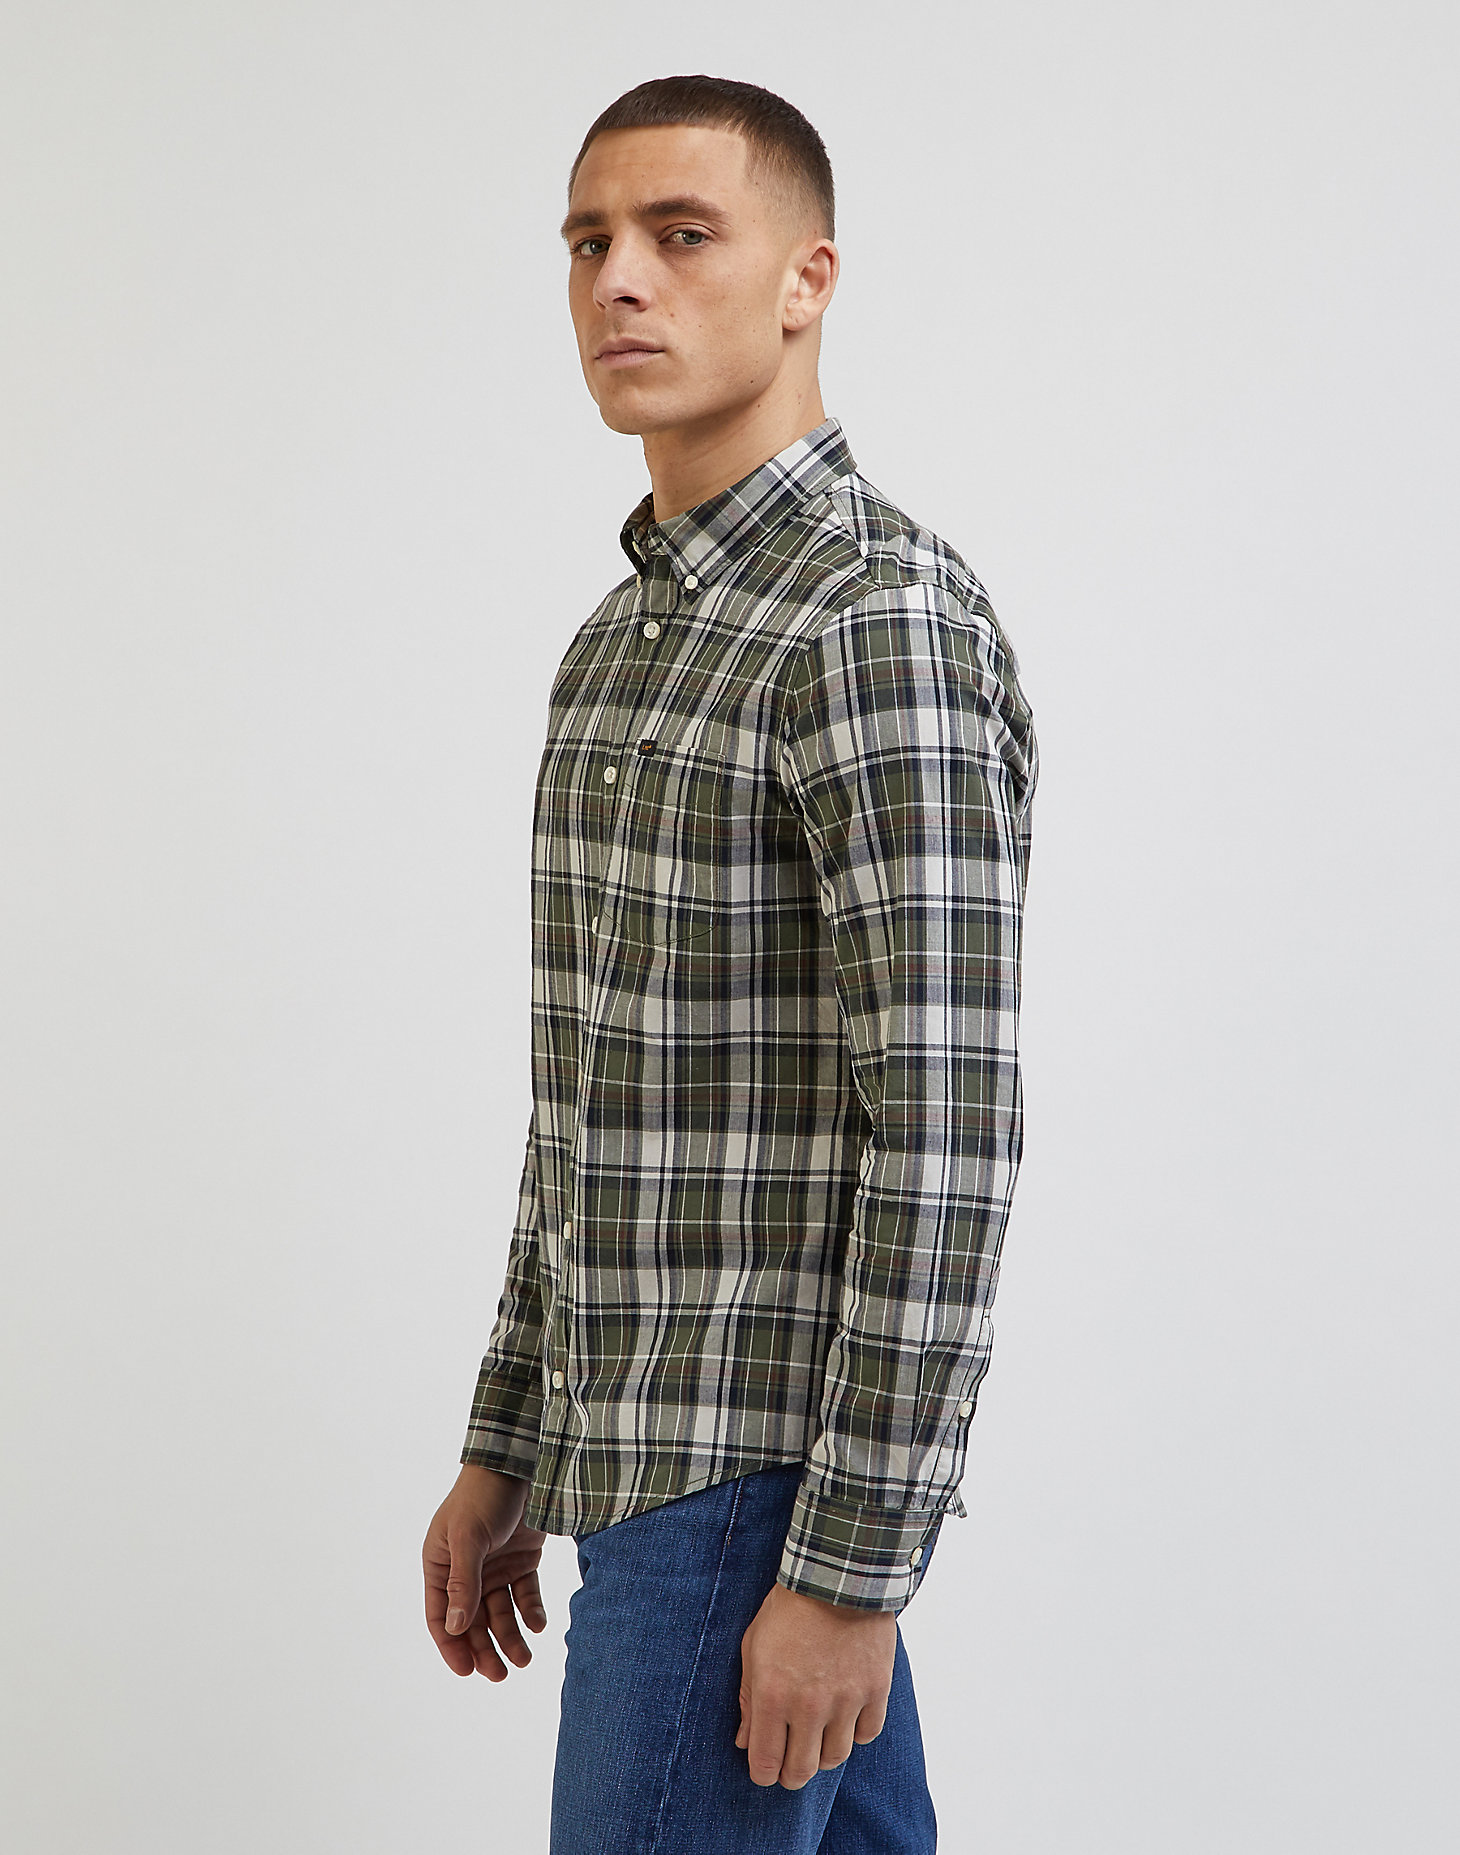 Button Down Shirt in Olive Grove alternative view 3